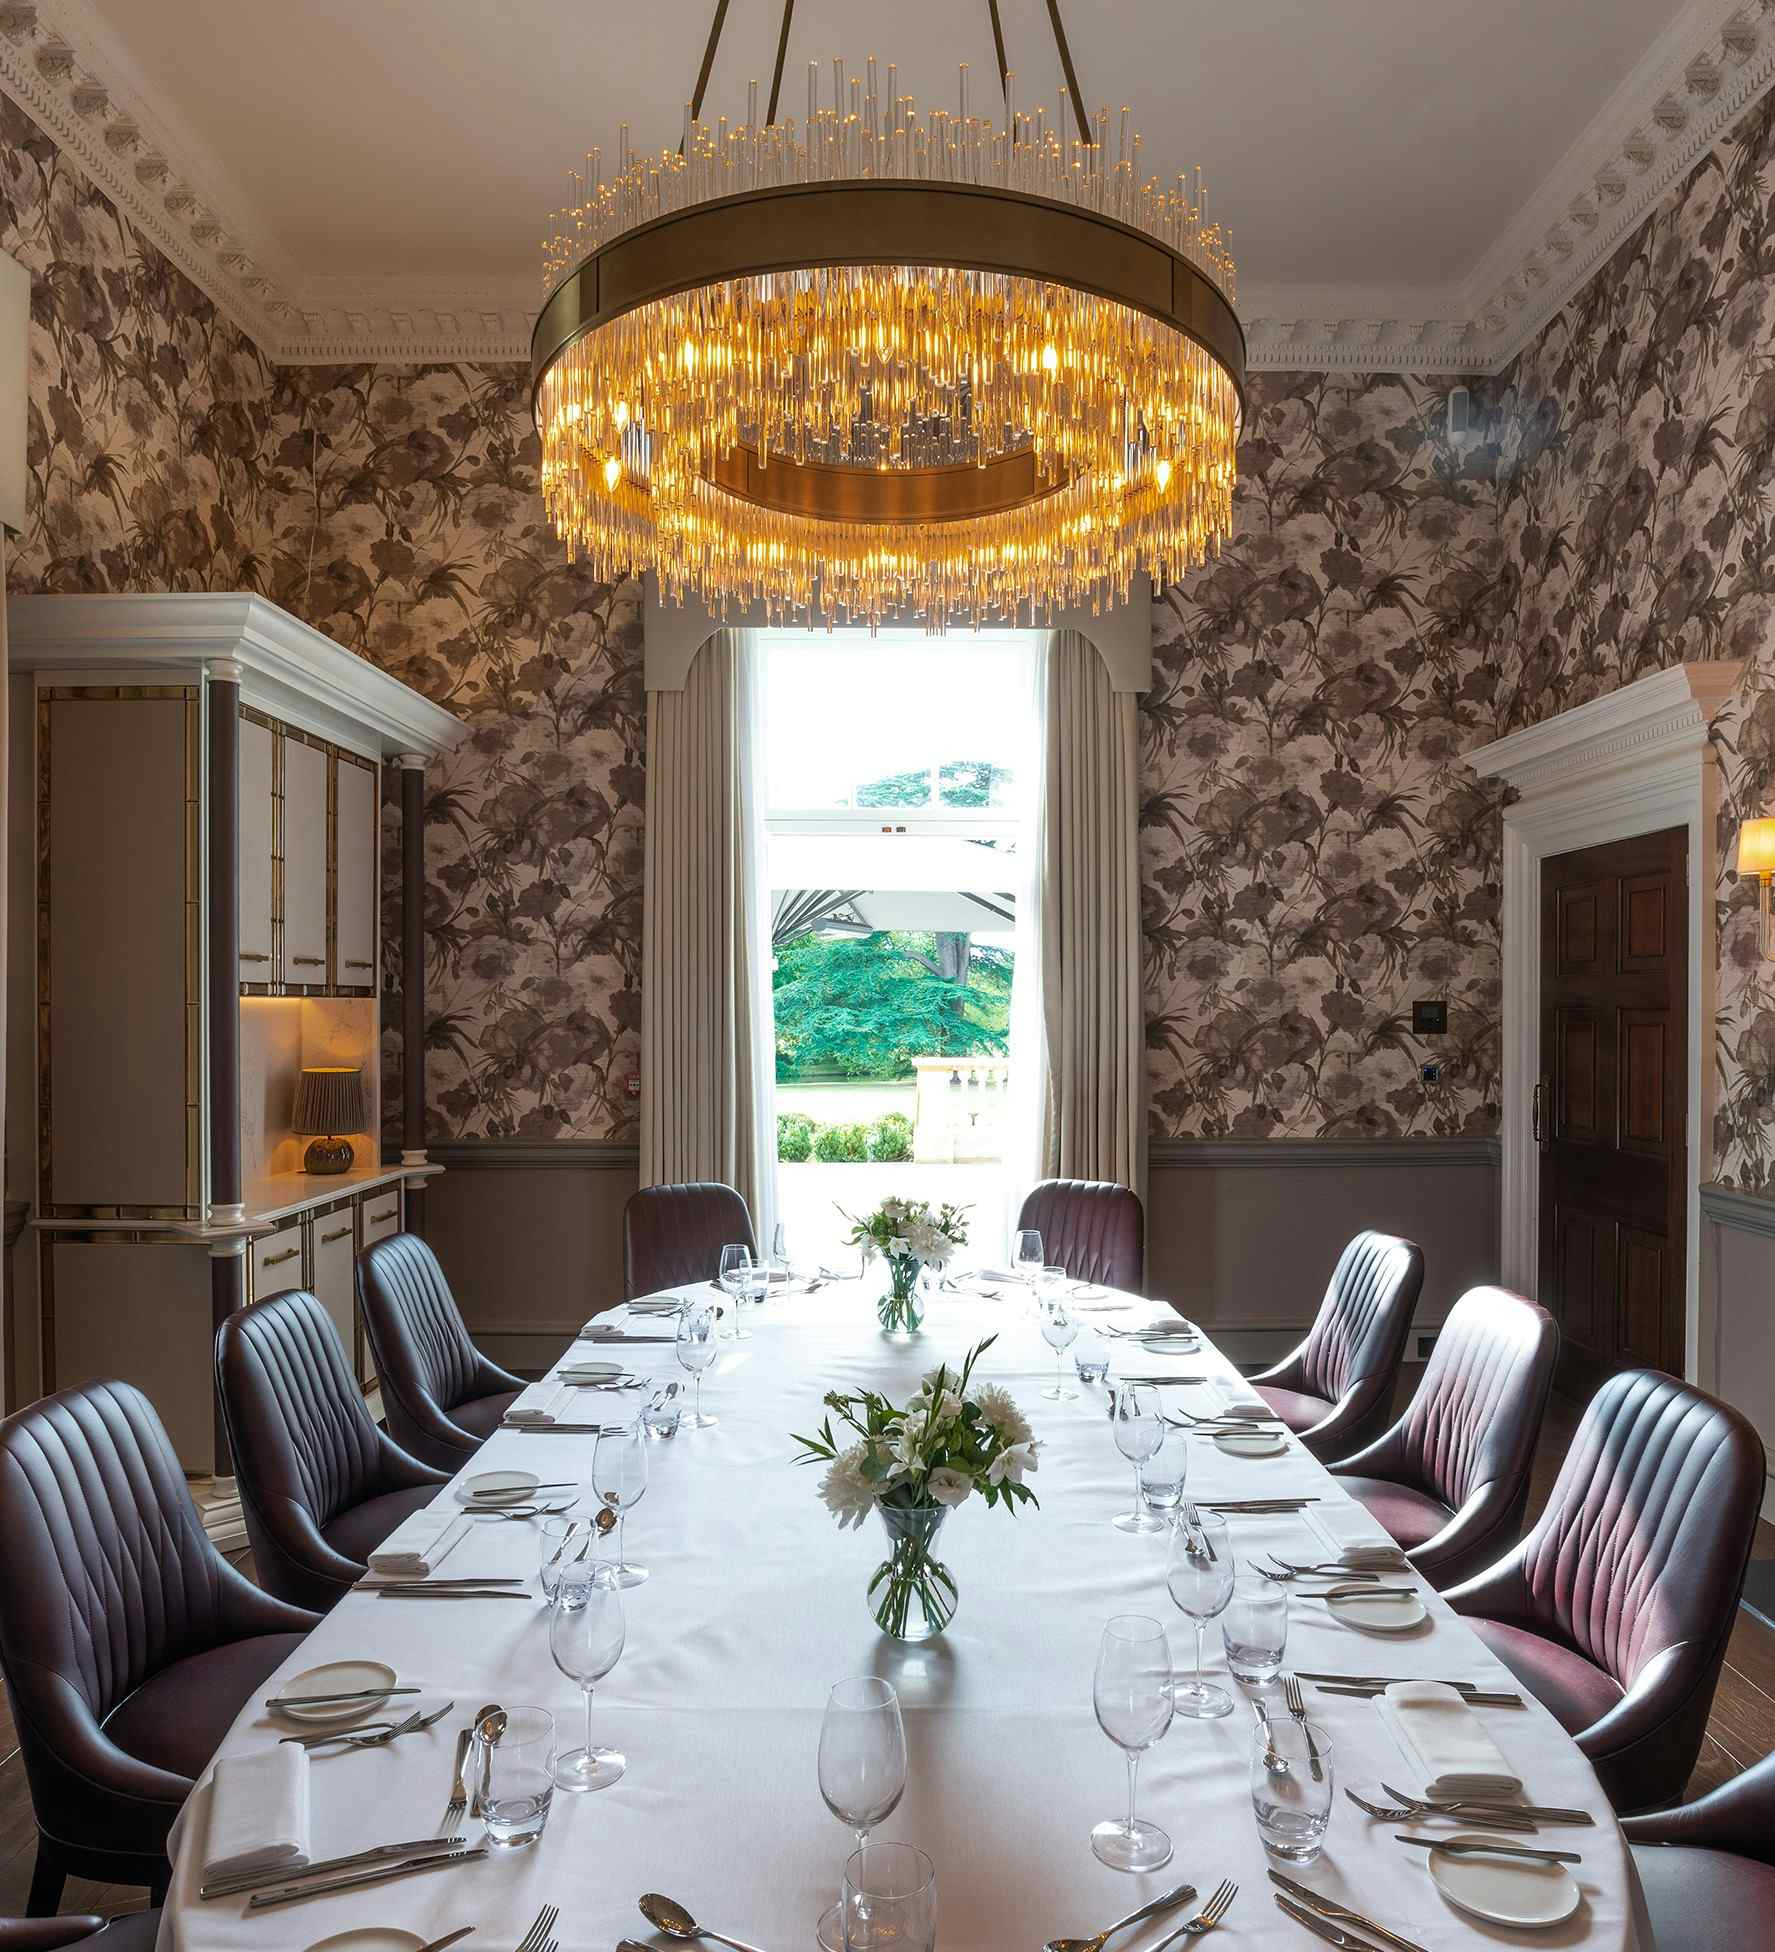 Lake Room, The Langley, a Luxury Collection Hotel, Buckinghamshire